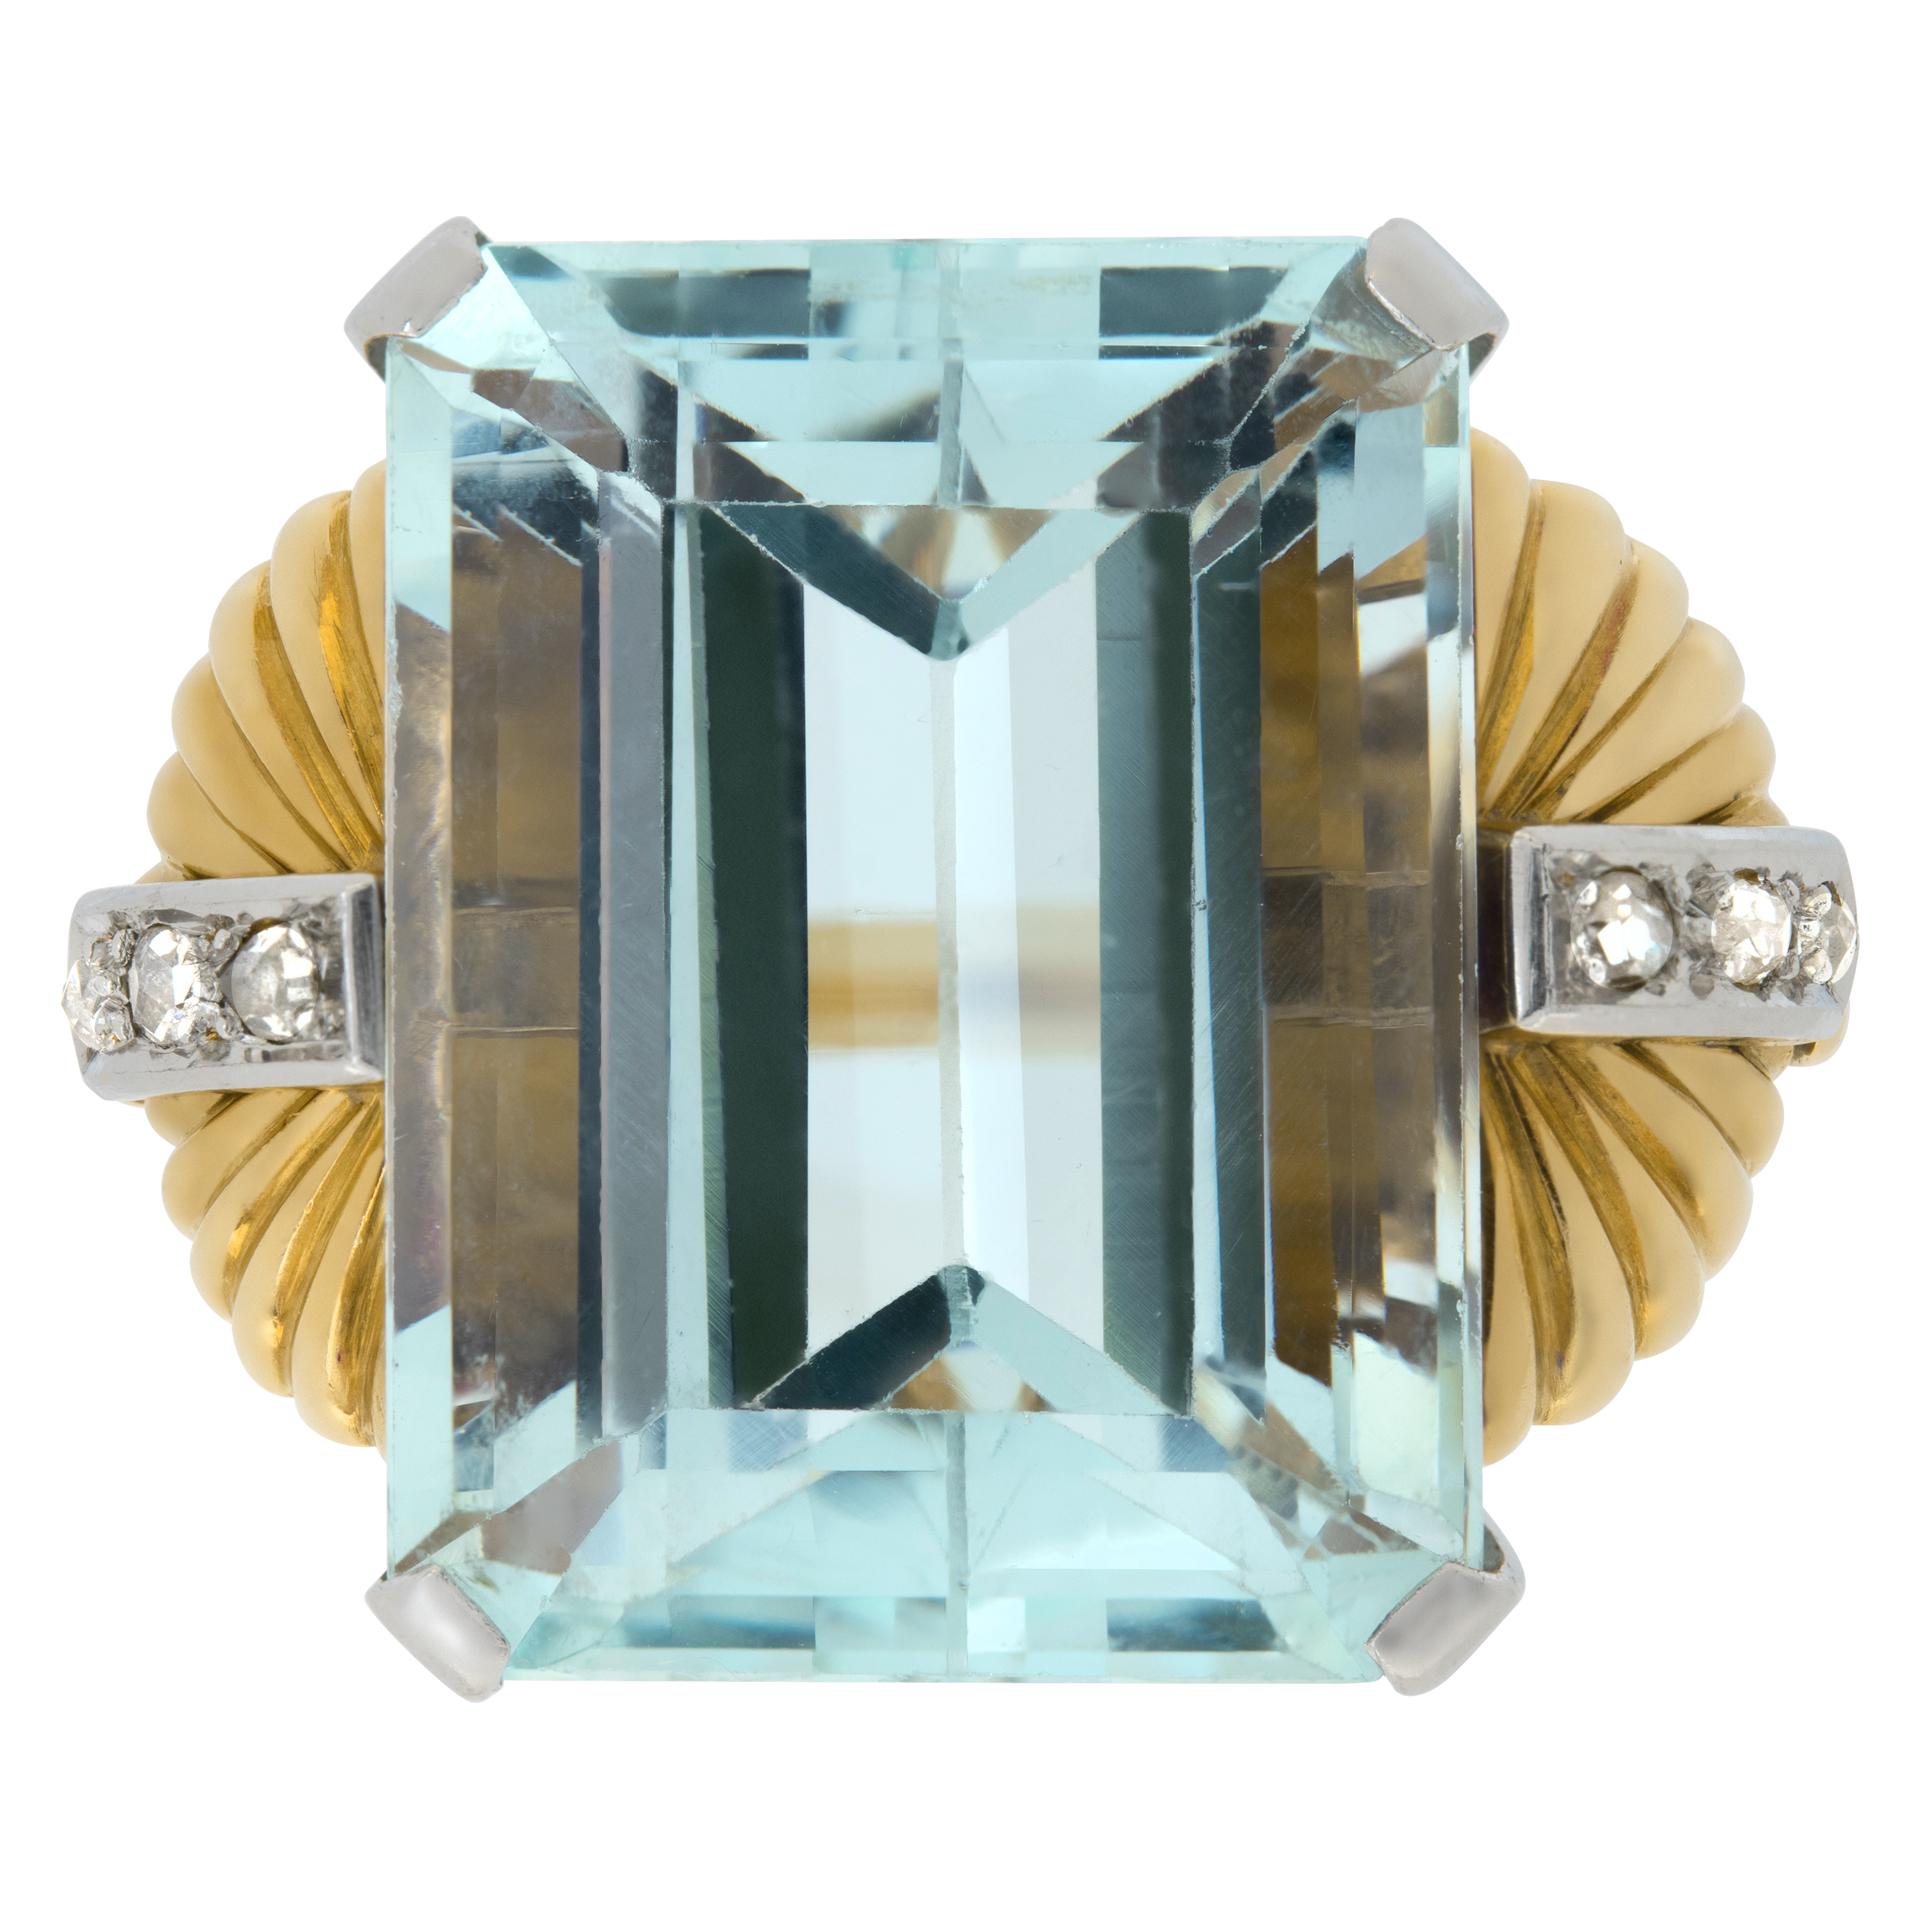 AGL certified Emerald cut Aquamarine approx. 30 carats set in 18K withe and yellow gold ring with 6 old mine cut diamonds. Aquamarine measurements: 21.876 x 16.52 x 11.75 mm. No clarity enhancement, excellent color stability.Size 6.This aquamarine